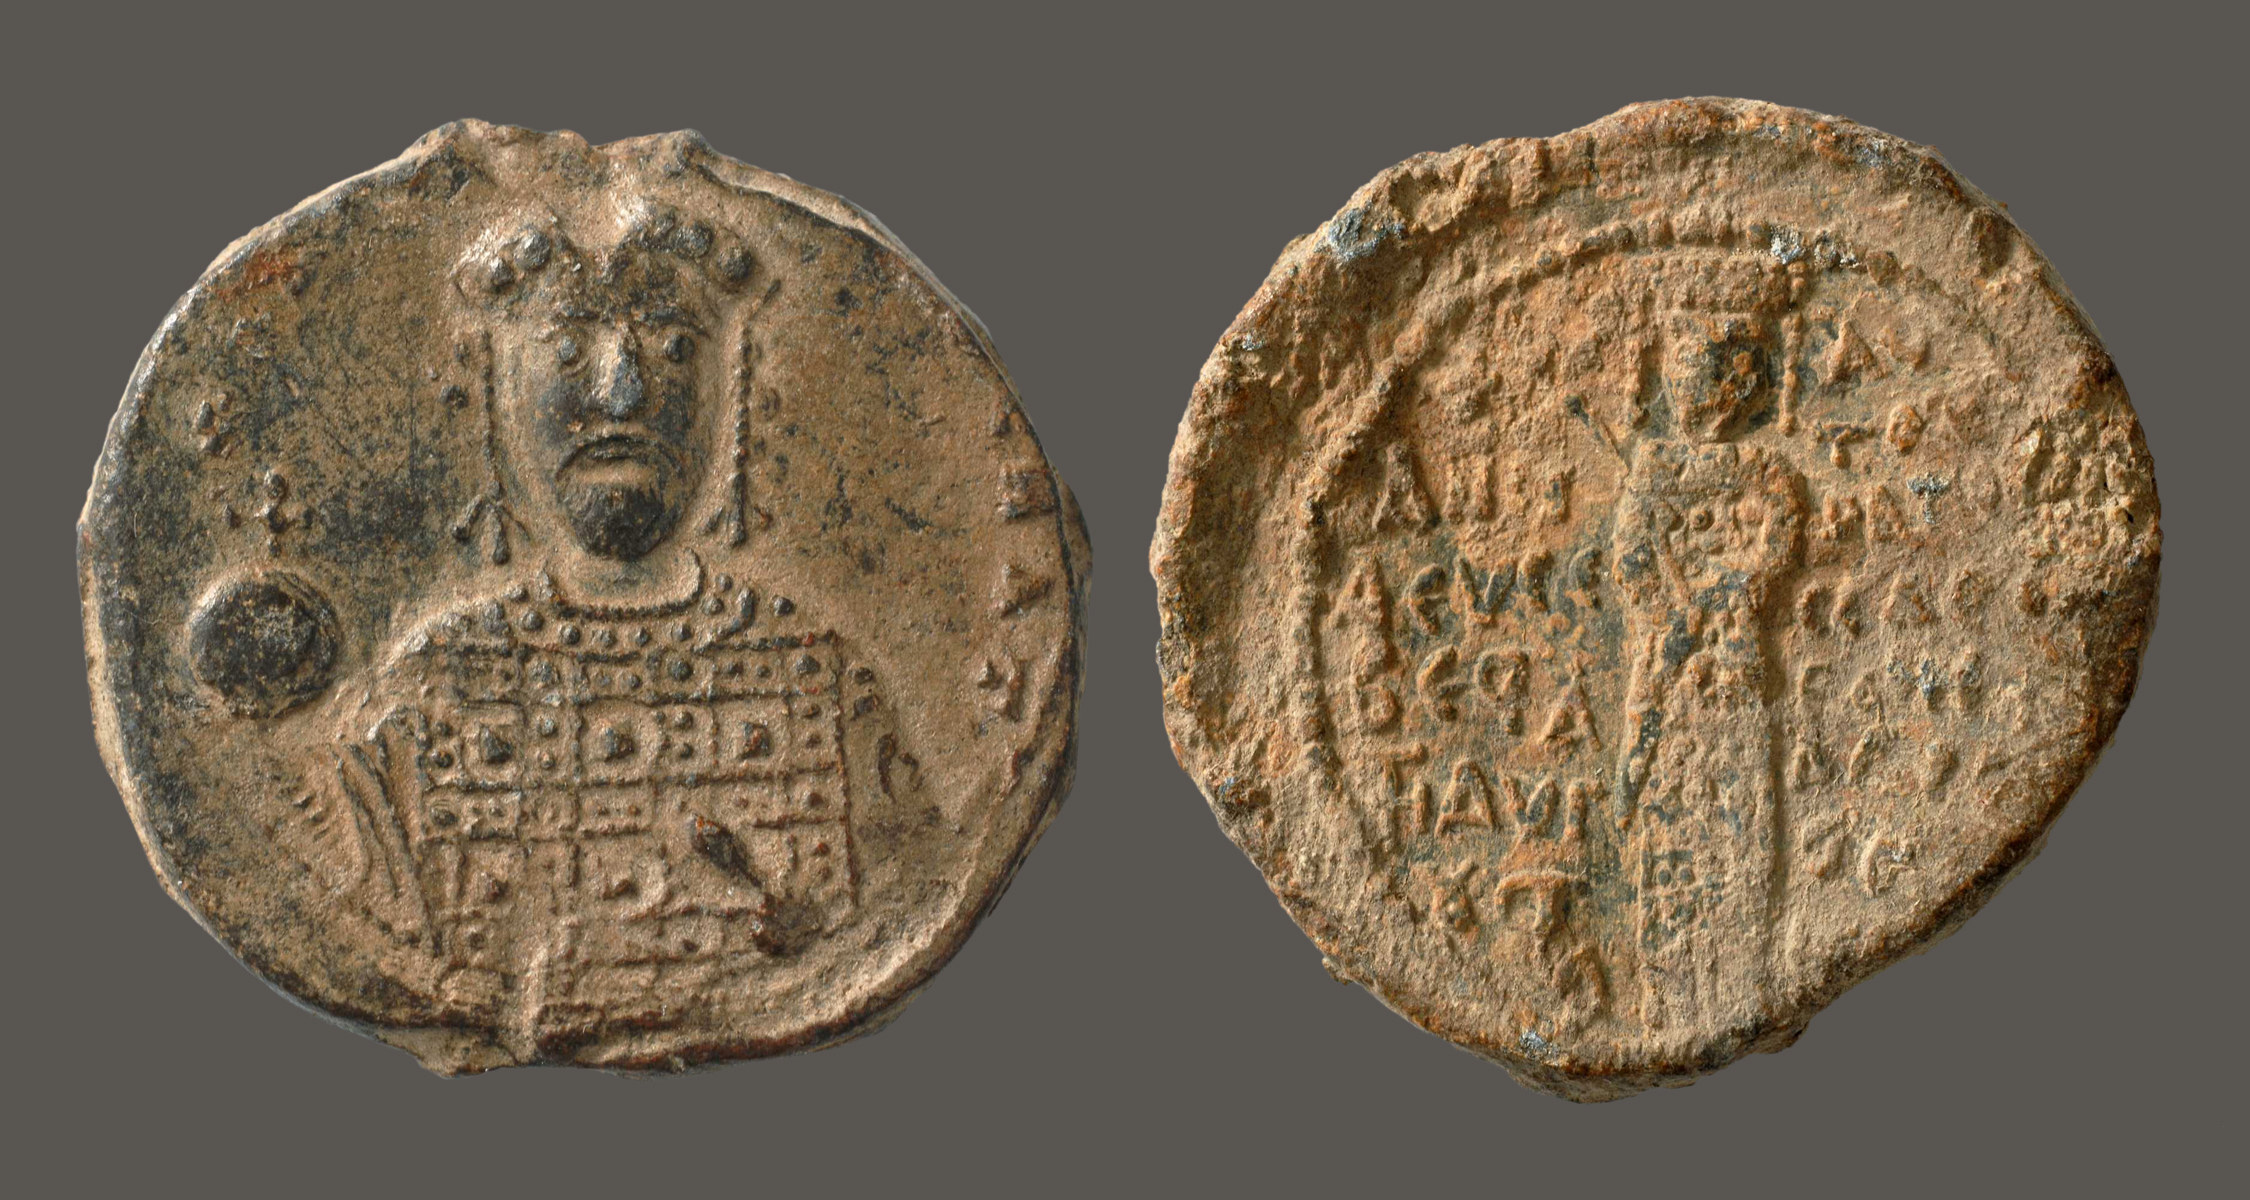 Basil II, issued 976–1025, Anna Palaiologina, issued 1341–47 (BZS.1958.106.637)